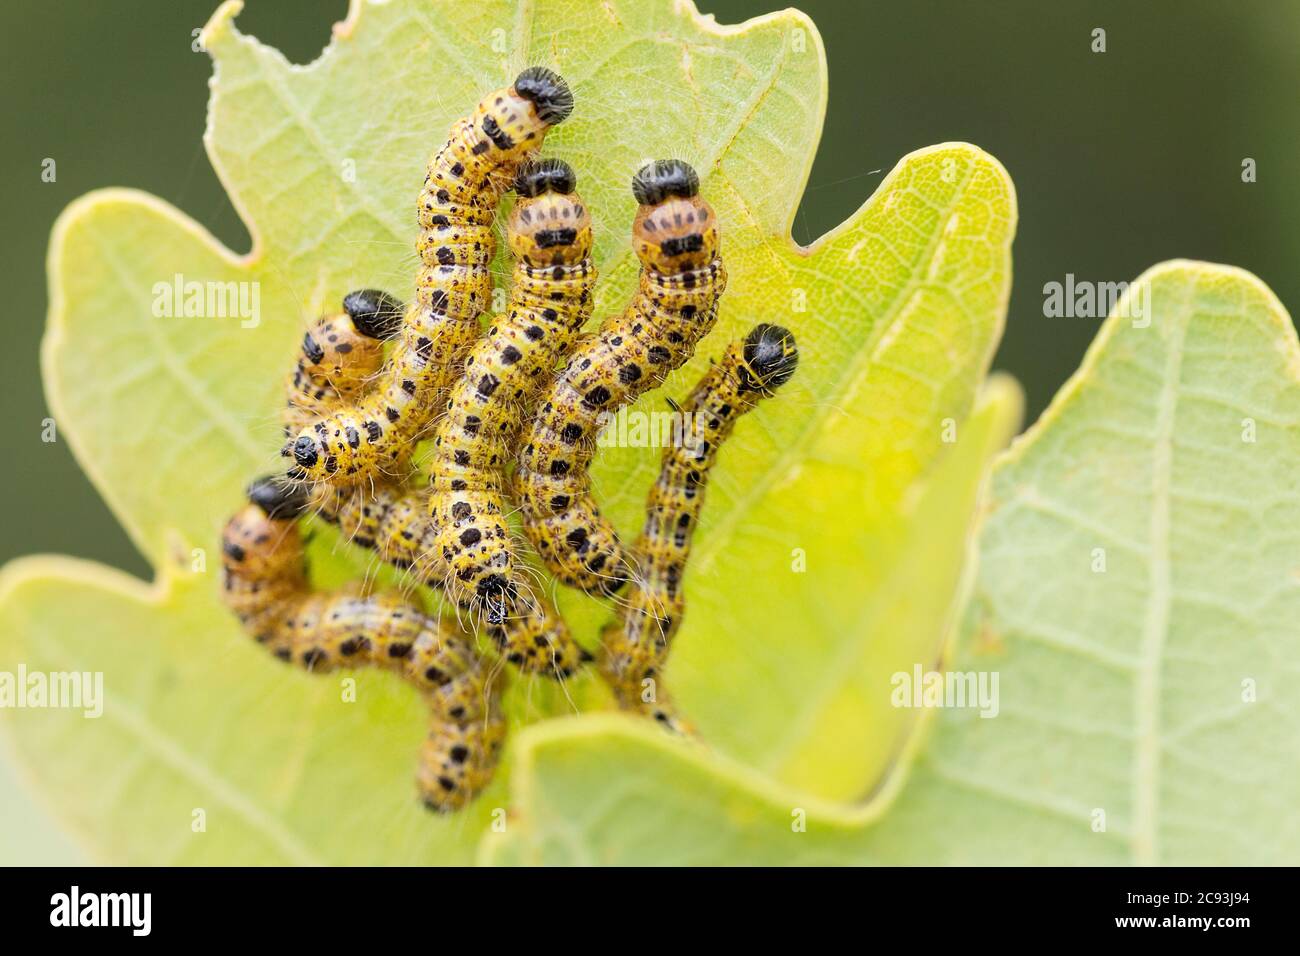 Yellow caterpillars with rows of black dots a black head and long fine hairs bunched in groups on the underside of leaves great white butterfly Stock Photo